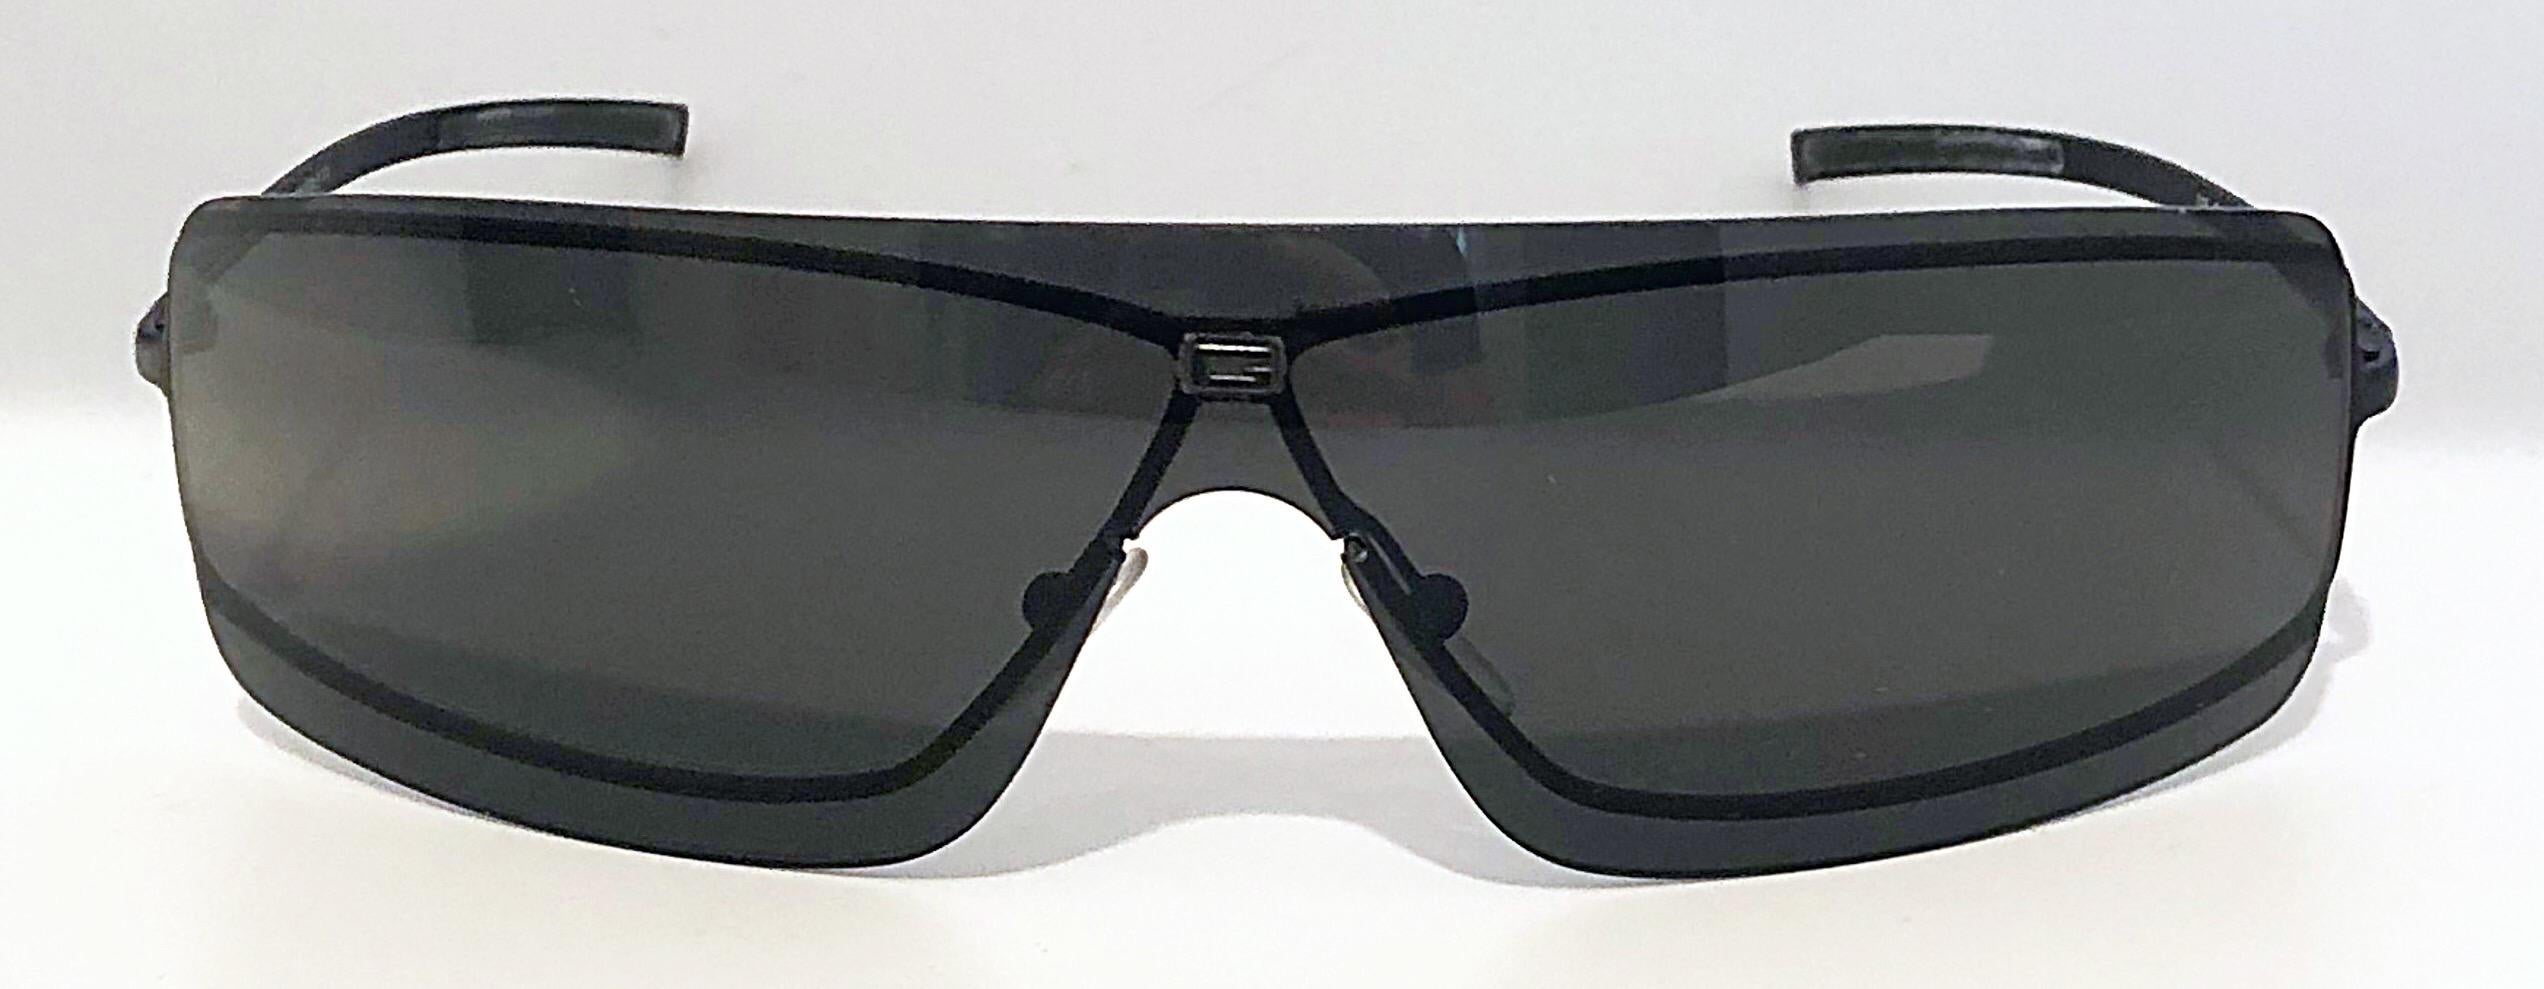 Gucci by Tom Ford Matrix Black Grey Rimless Unisex 1990s Vintage 90s Sunglasses For Sale 11